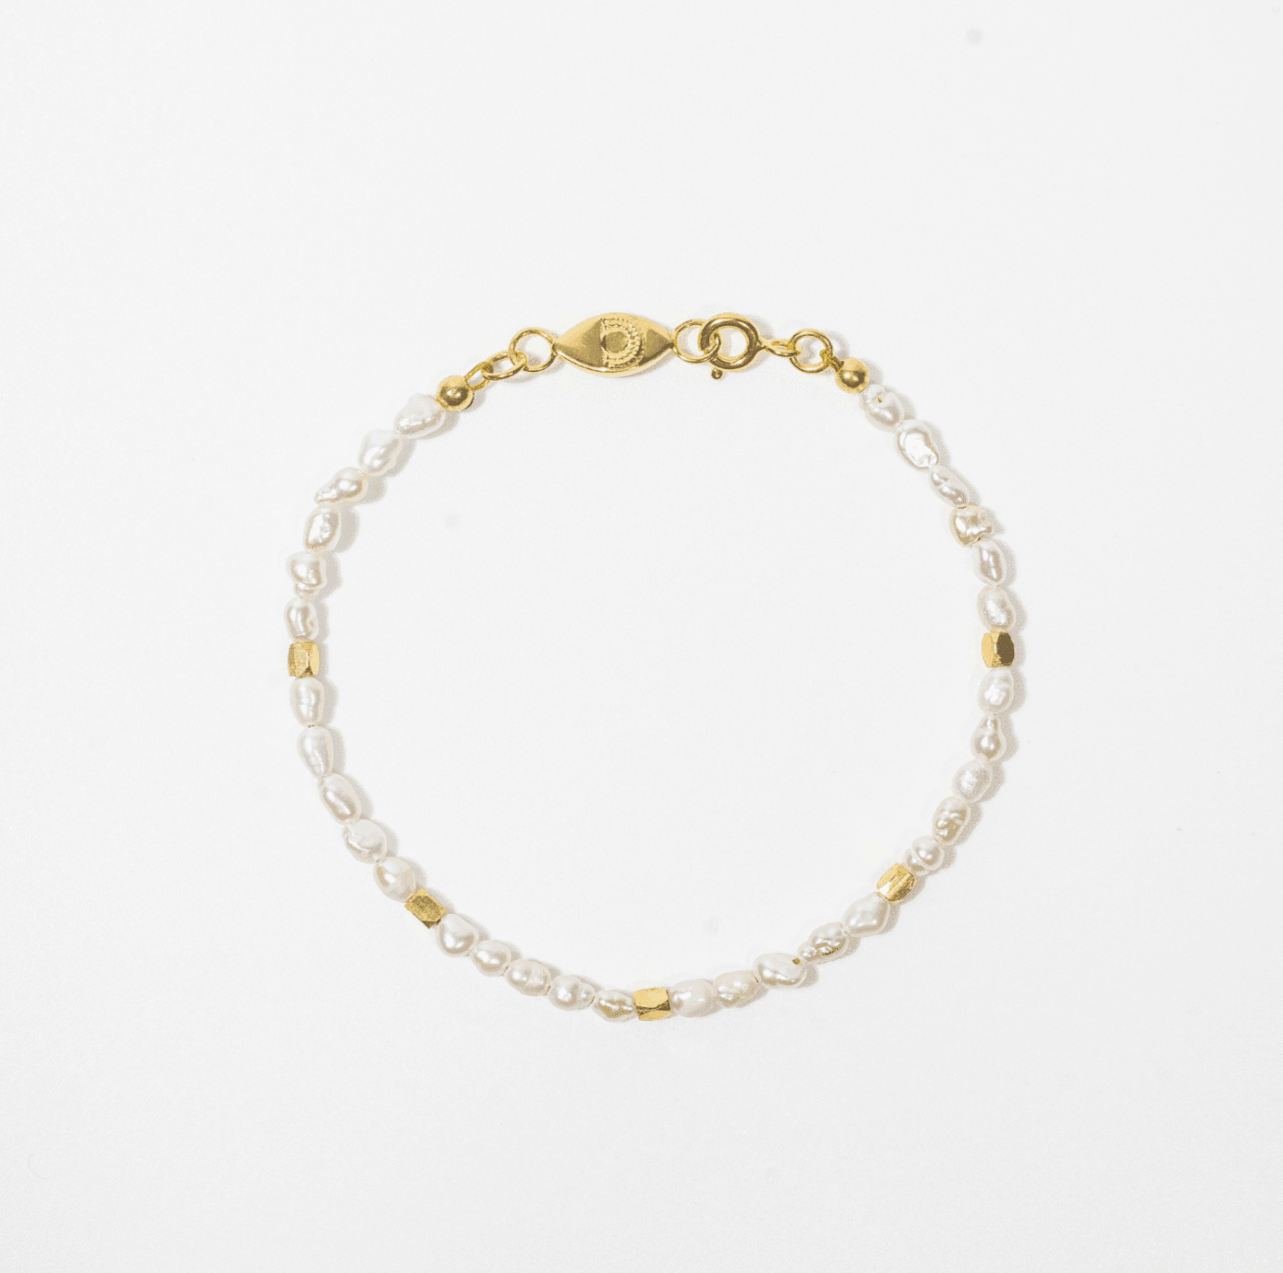 FIVE BEADS PEARL BRACELET - Expat Life Style